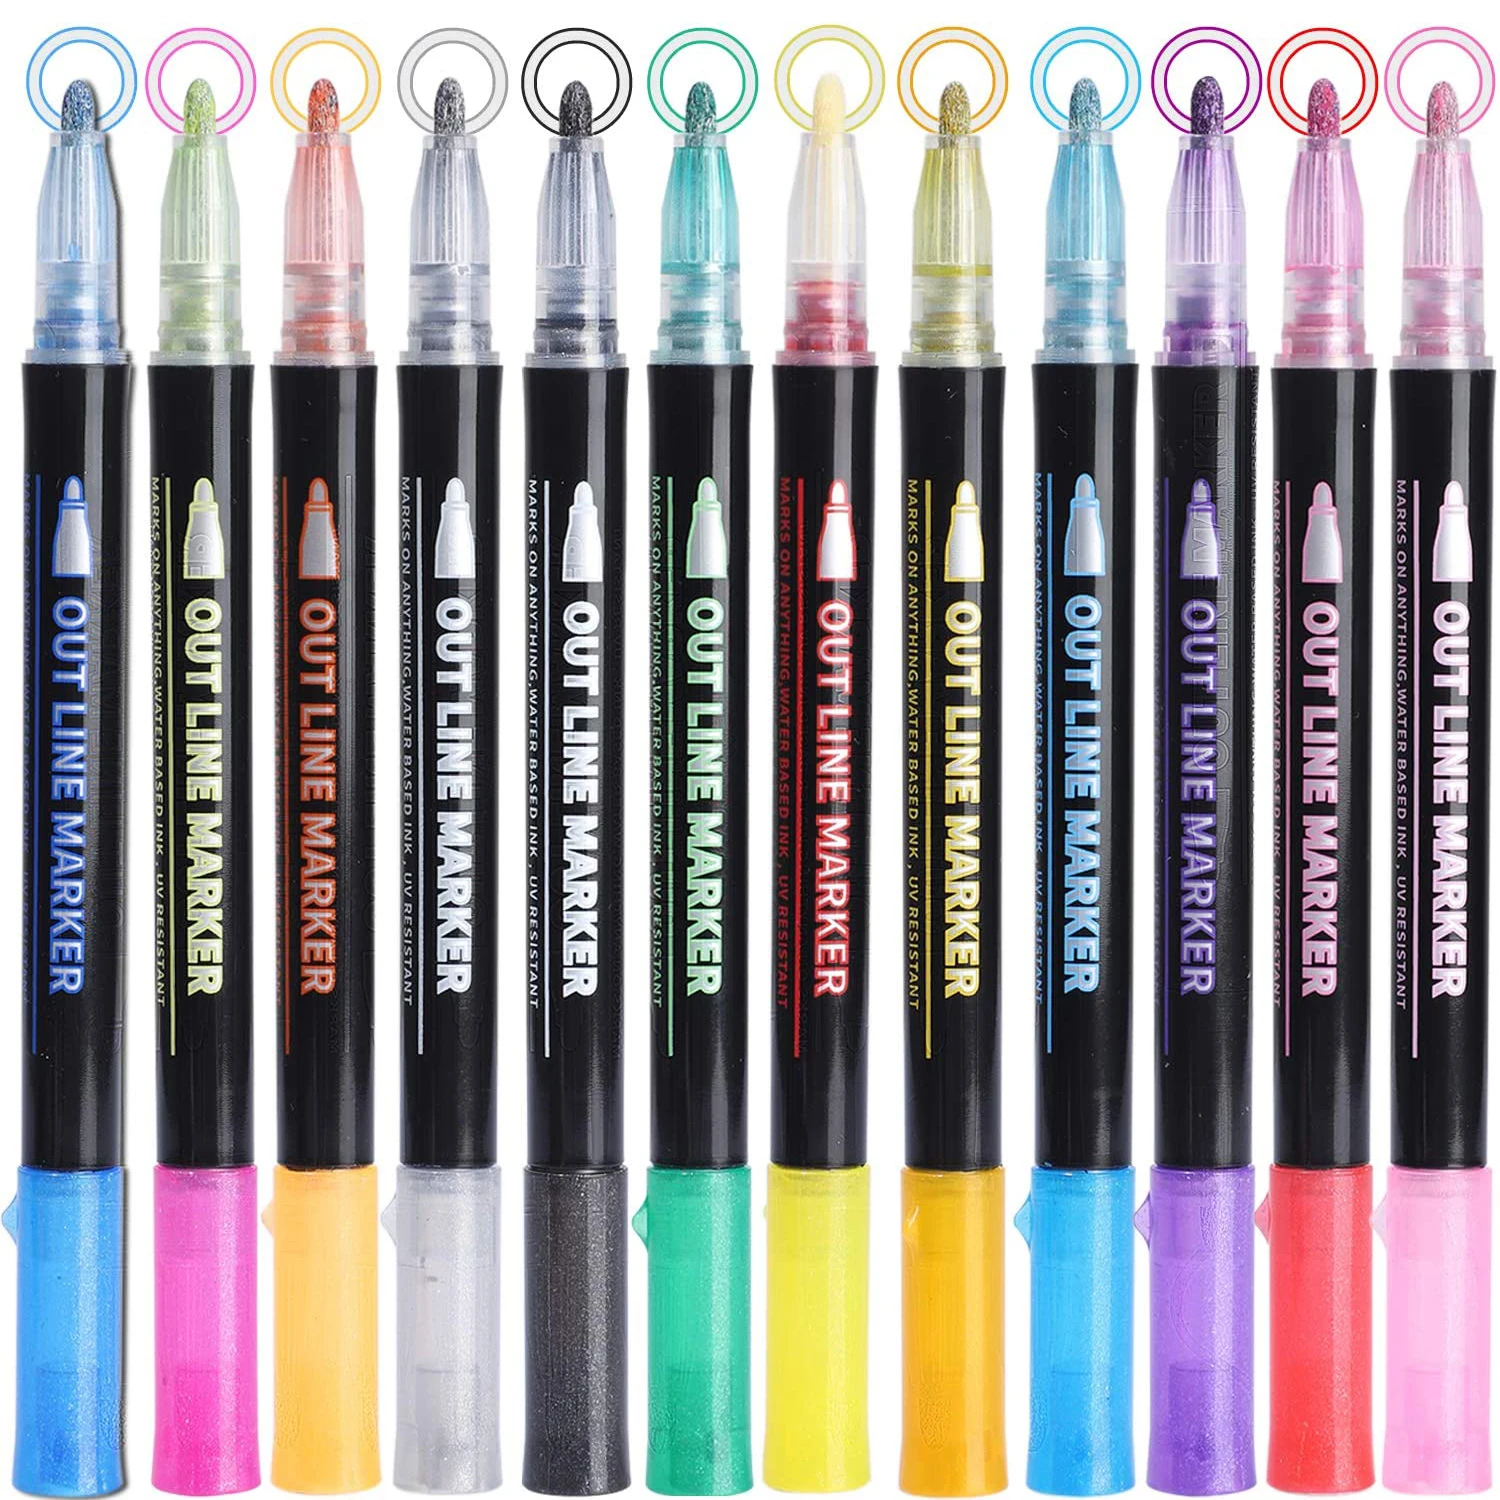 

12/24 Colors Outline Metallic Markers Pens Double Line Pen Magic Glitter Drawing Pen for Greeting Cards, Painting, DIY Sketching